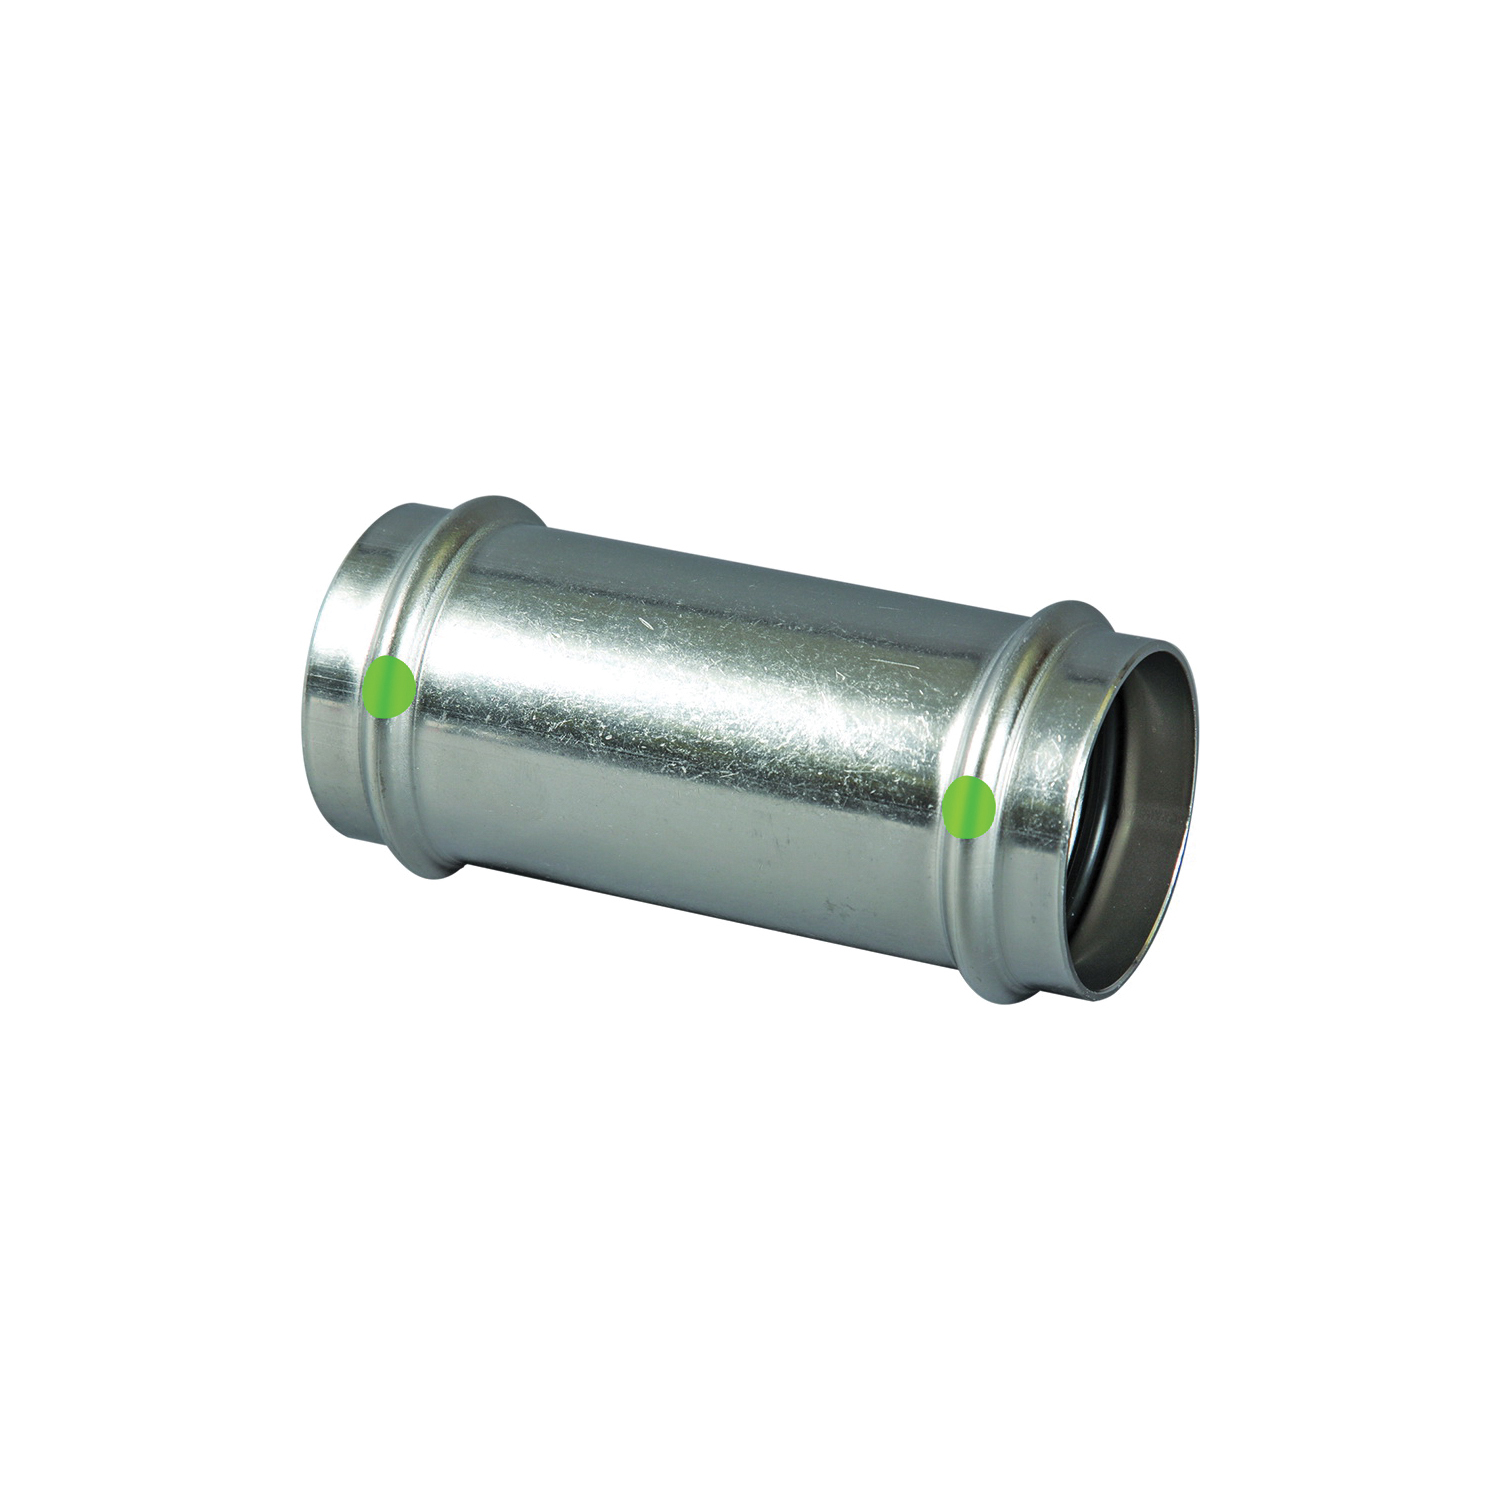 ProPress 316 Stainless Steel Pipe Coupling